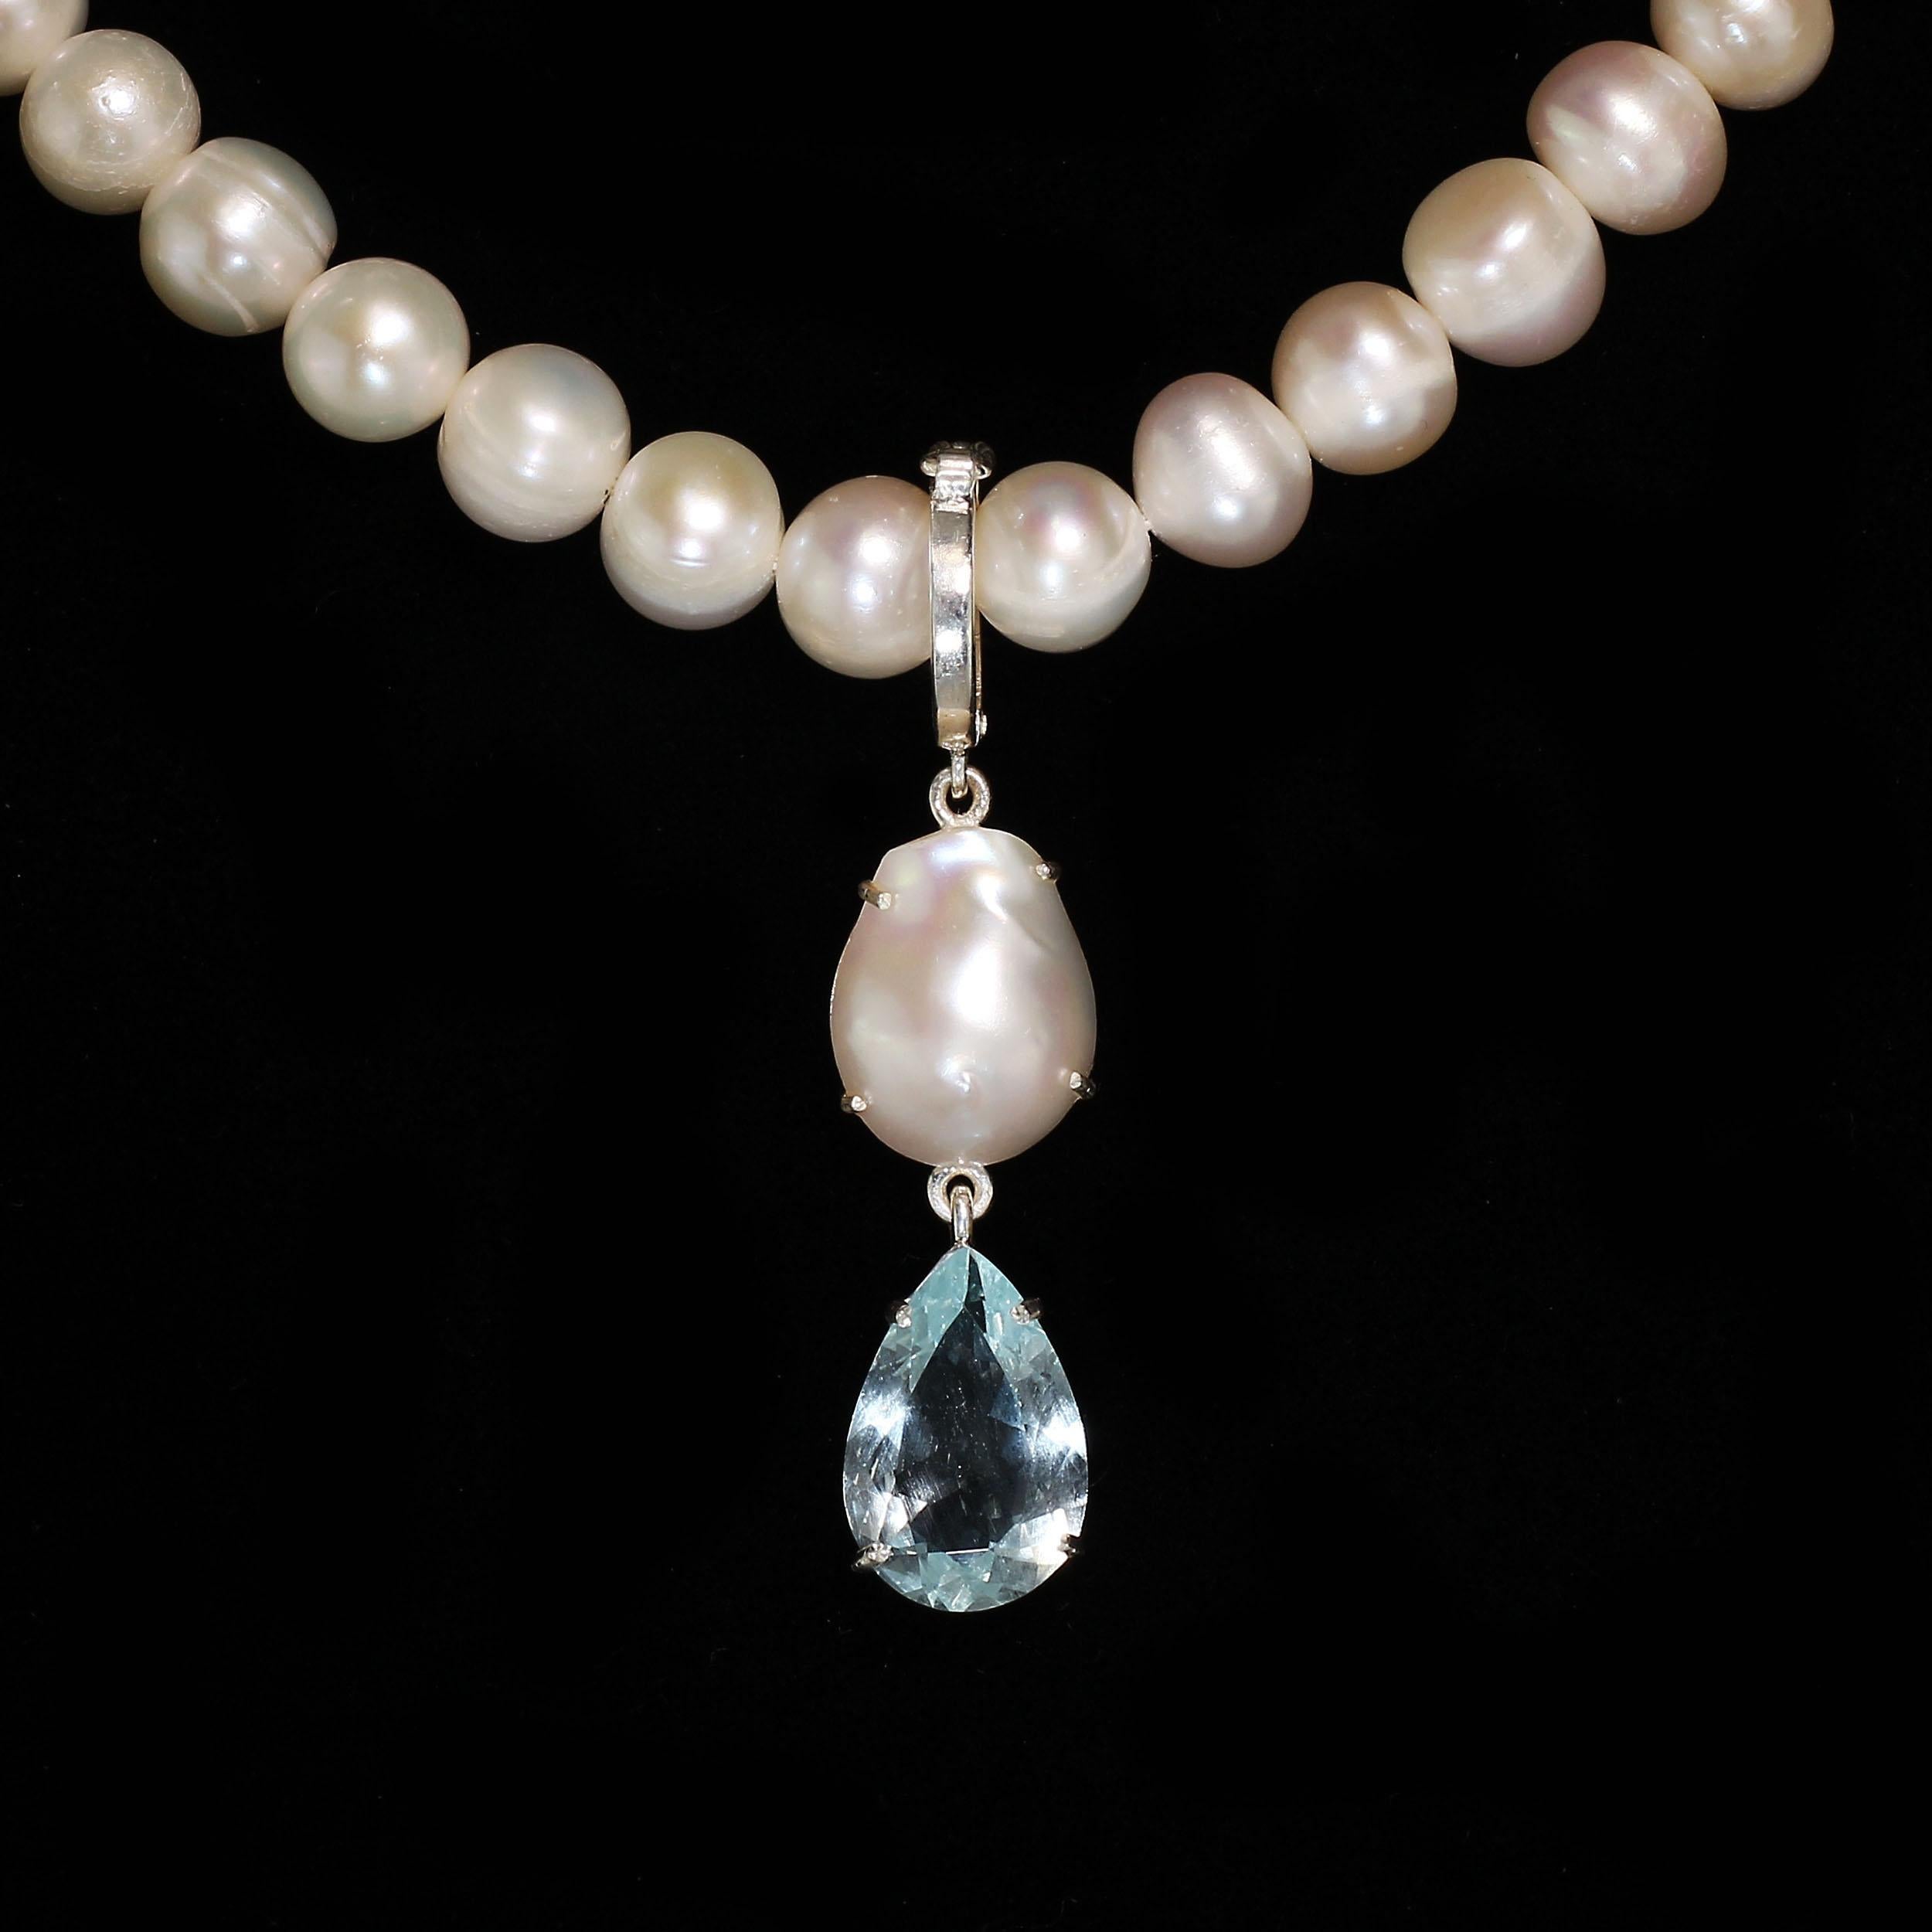 'Because you deserve to wear Pearls'

Lovely Blue and White Pendant featuring a pear shaped Aquamarine and white Baroque Pearl. This delightful pendant hangs from a hinged Sterling Silver bail which will fit over your favorite pearls, necklace, or